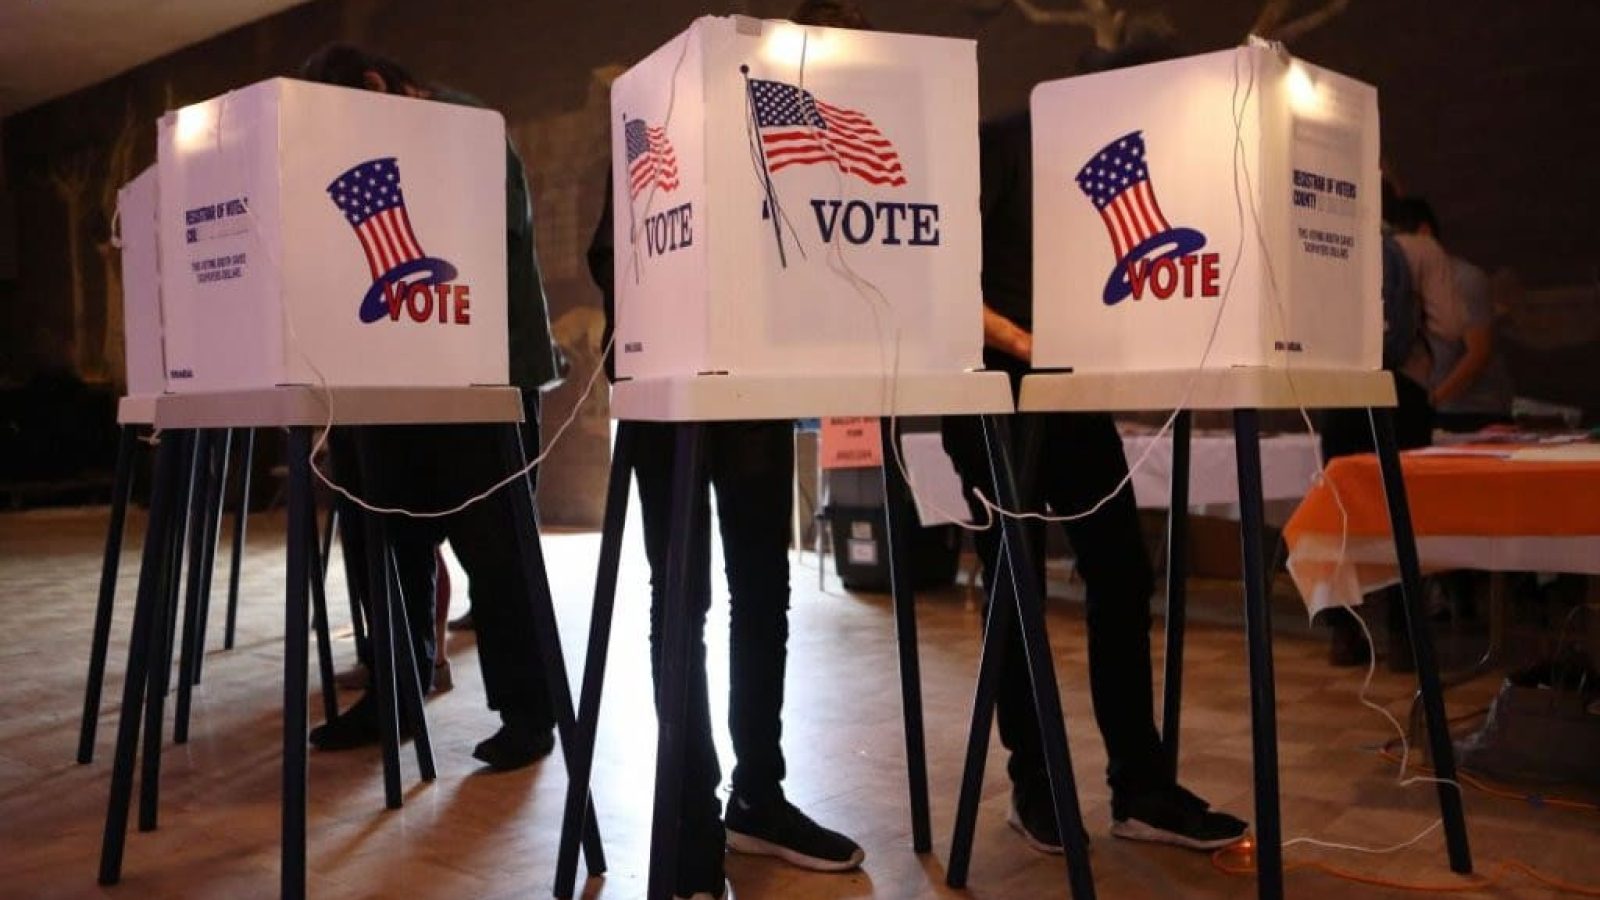 Voters in voting booth